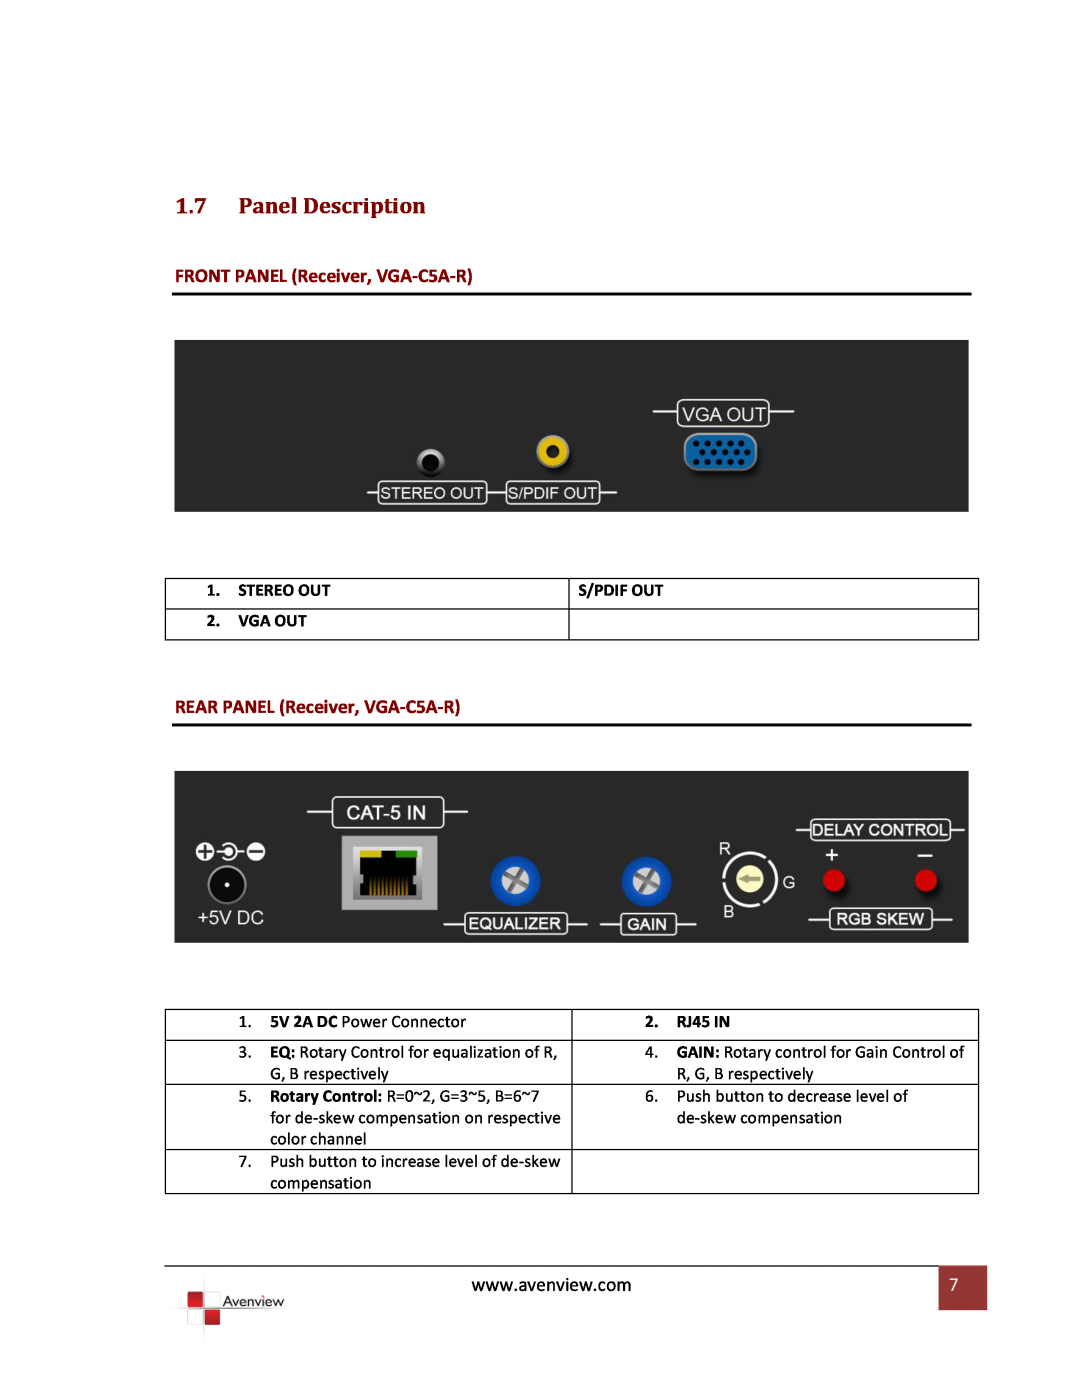 Avenview specifications 1.7Panel Description, Stereo Out, S/Pdif Out, Vga Out, RJ45 IN, FRONT PANEL Receiver, VGA-C5A-R 